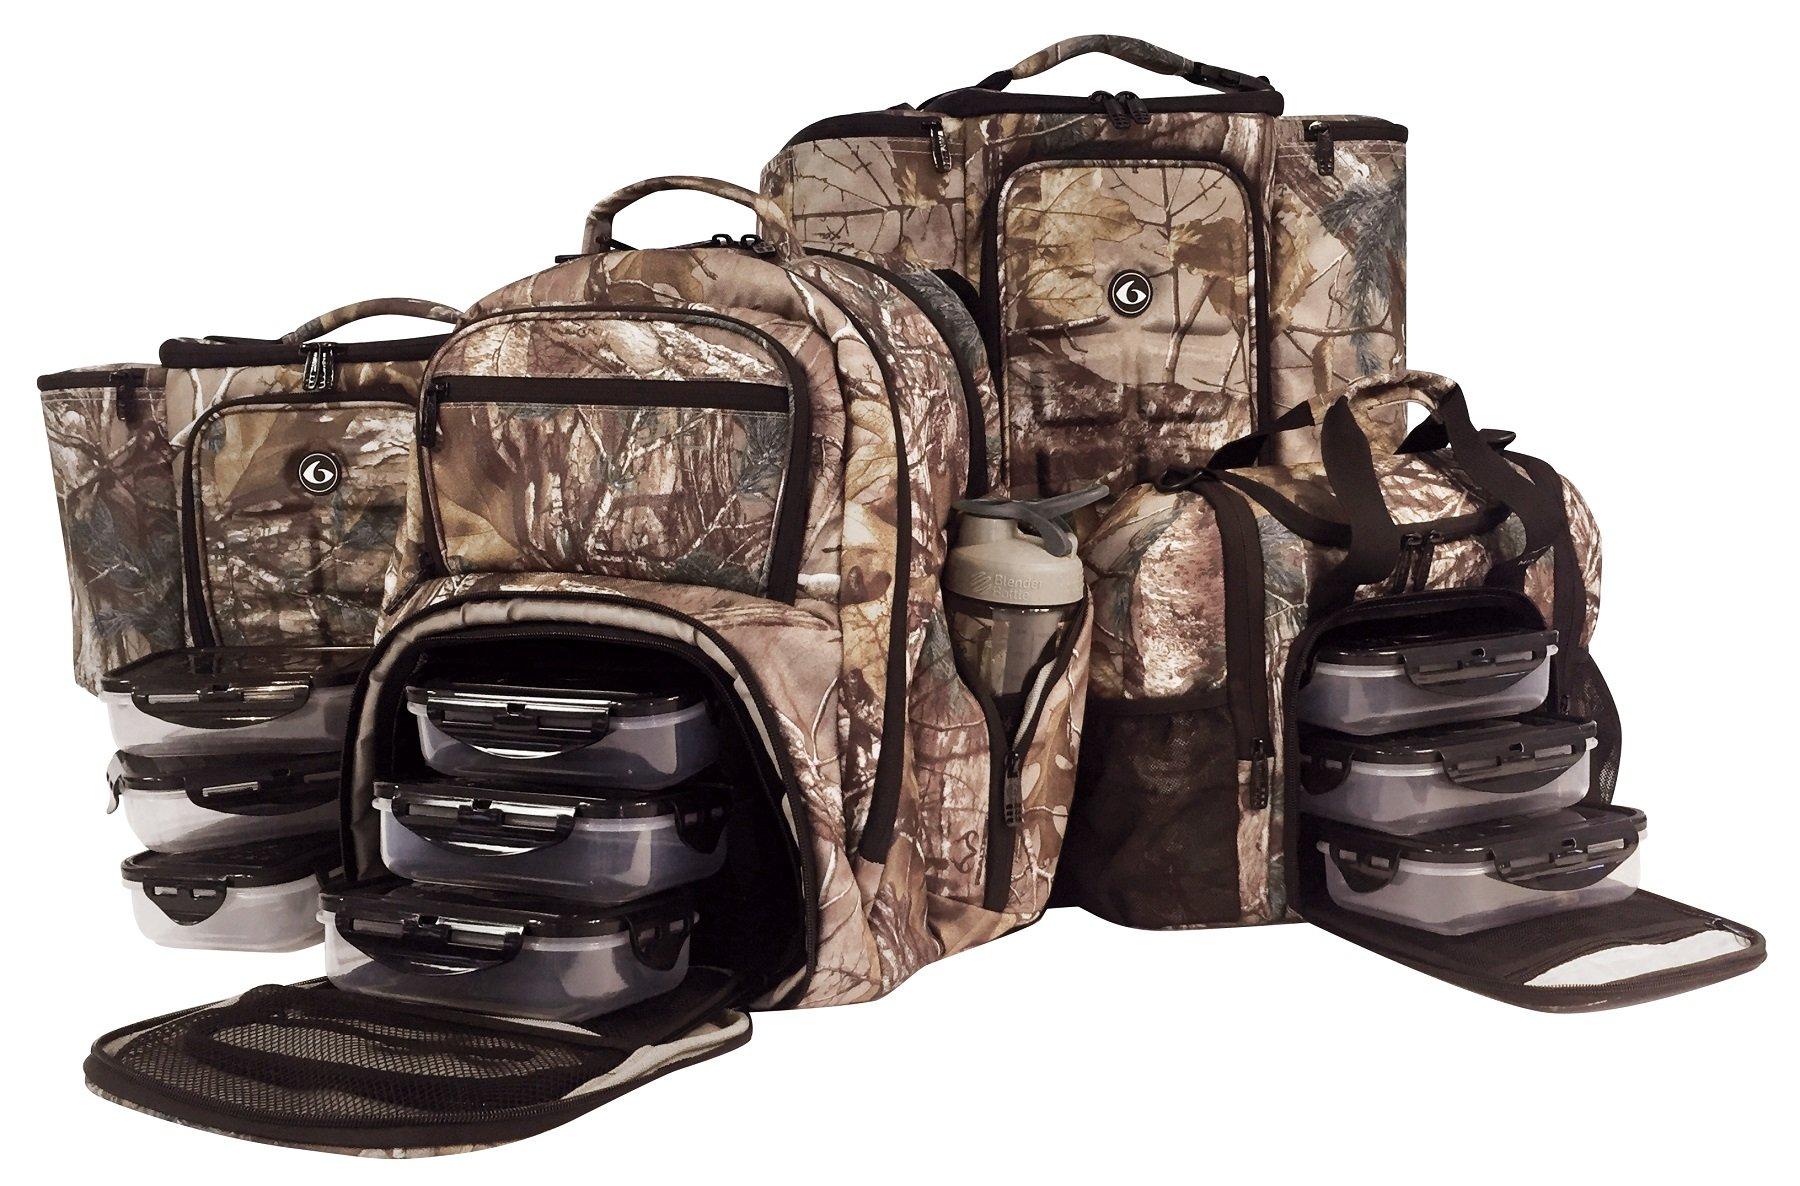 Six Pack Fitness Realtree Meal Prep Bag